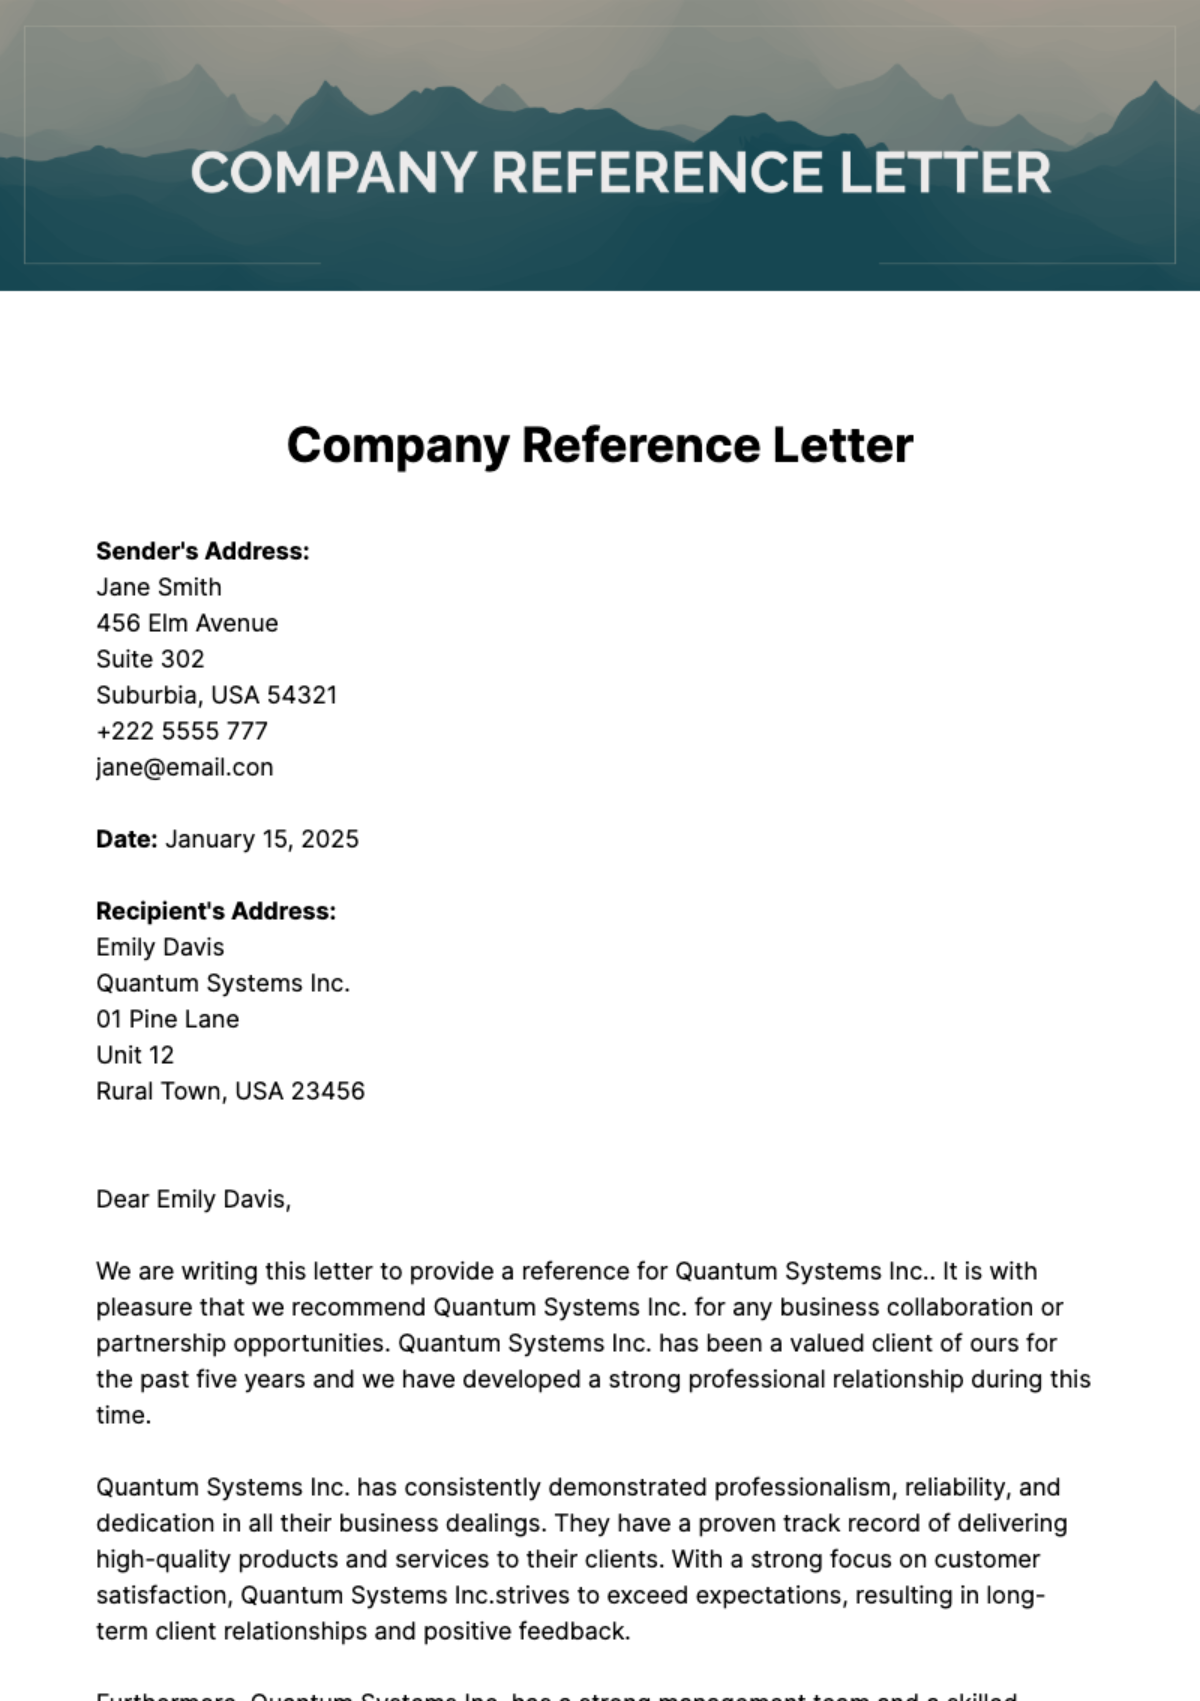 Free Company Reference Letter Template